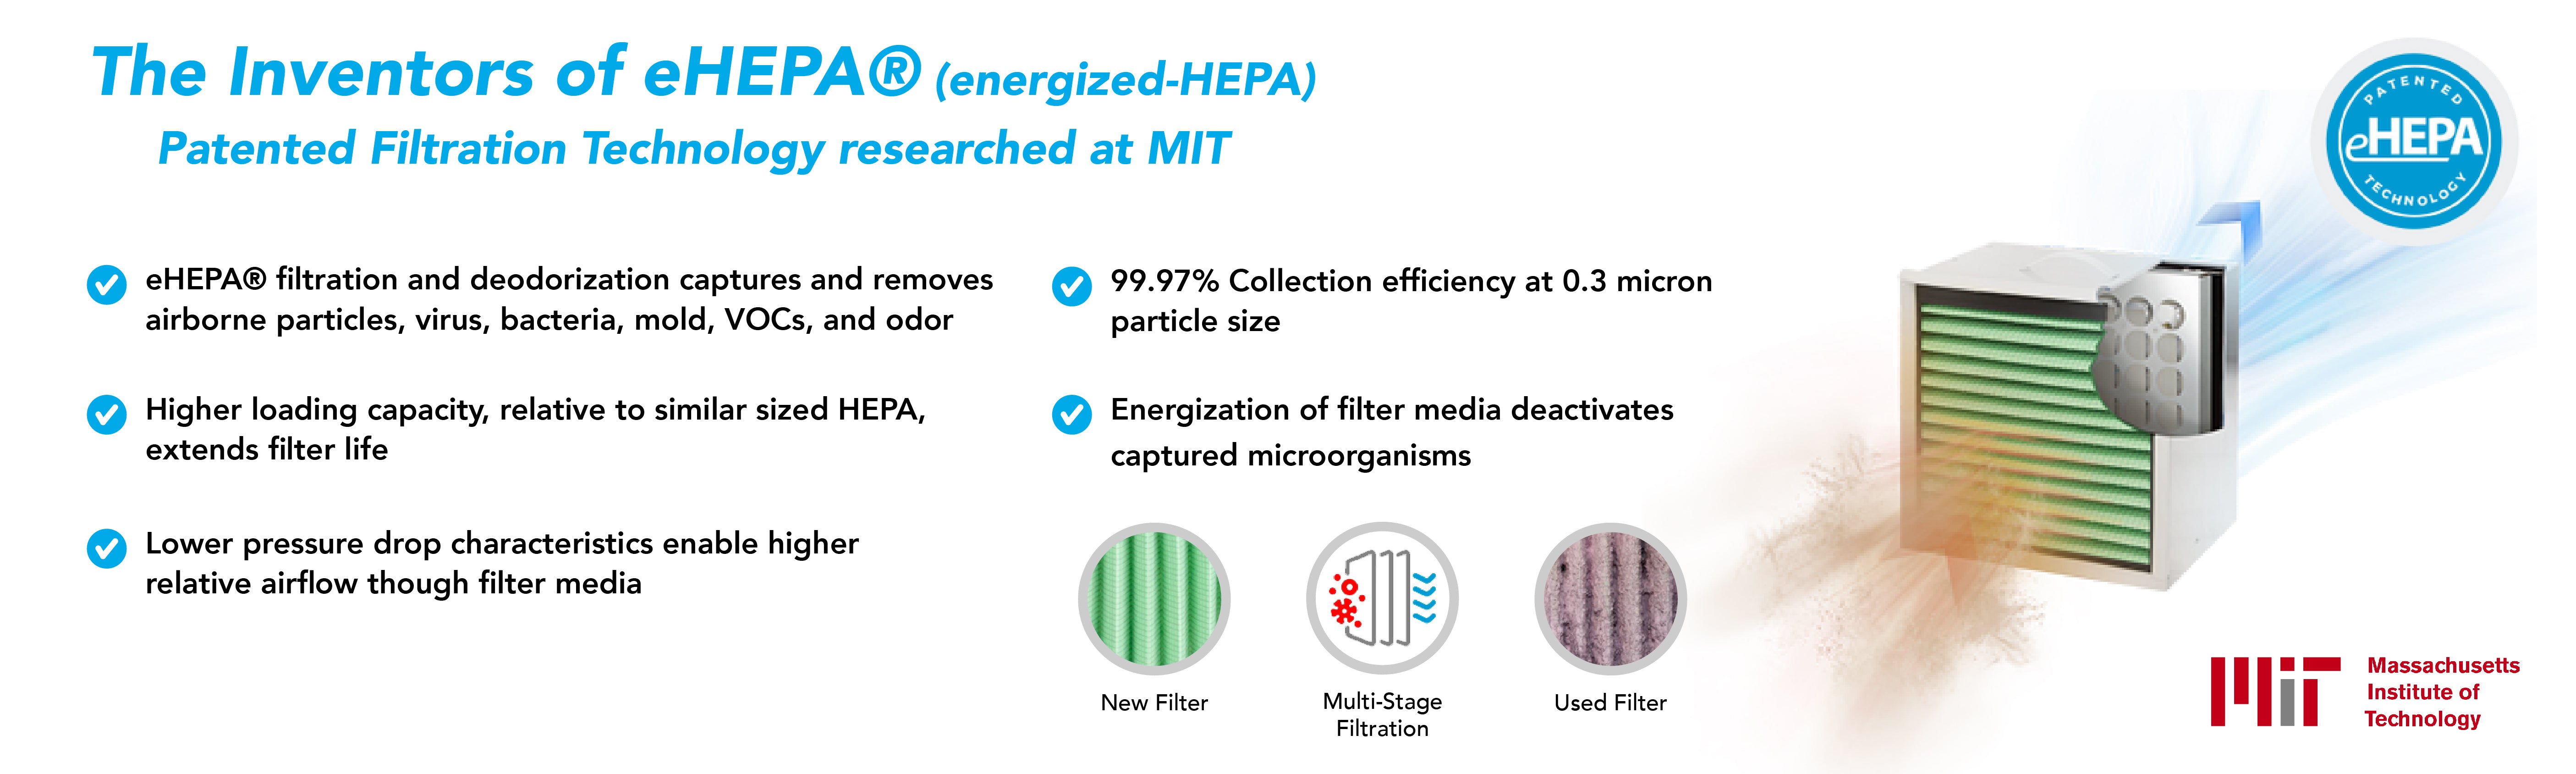 Air Purifiers utilize patented eHEPA® technology